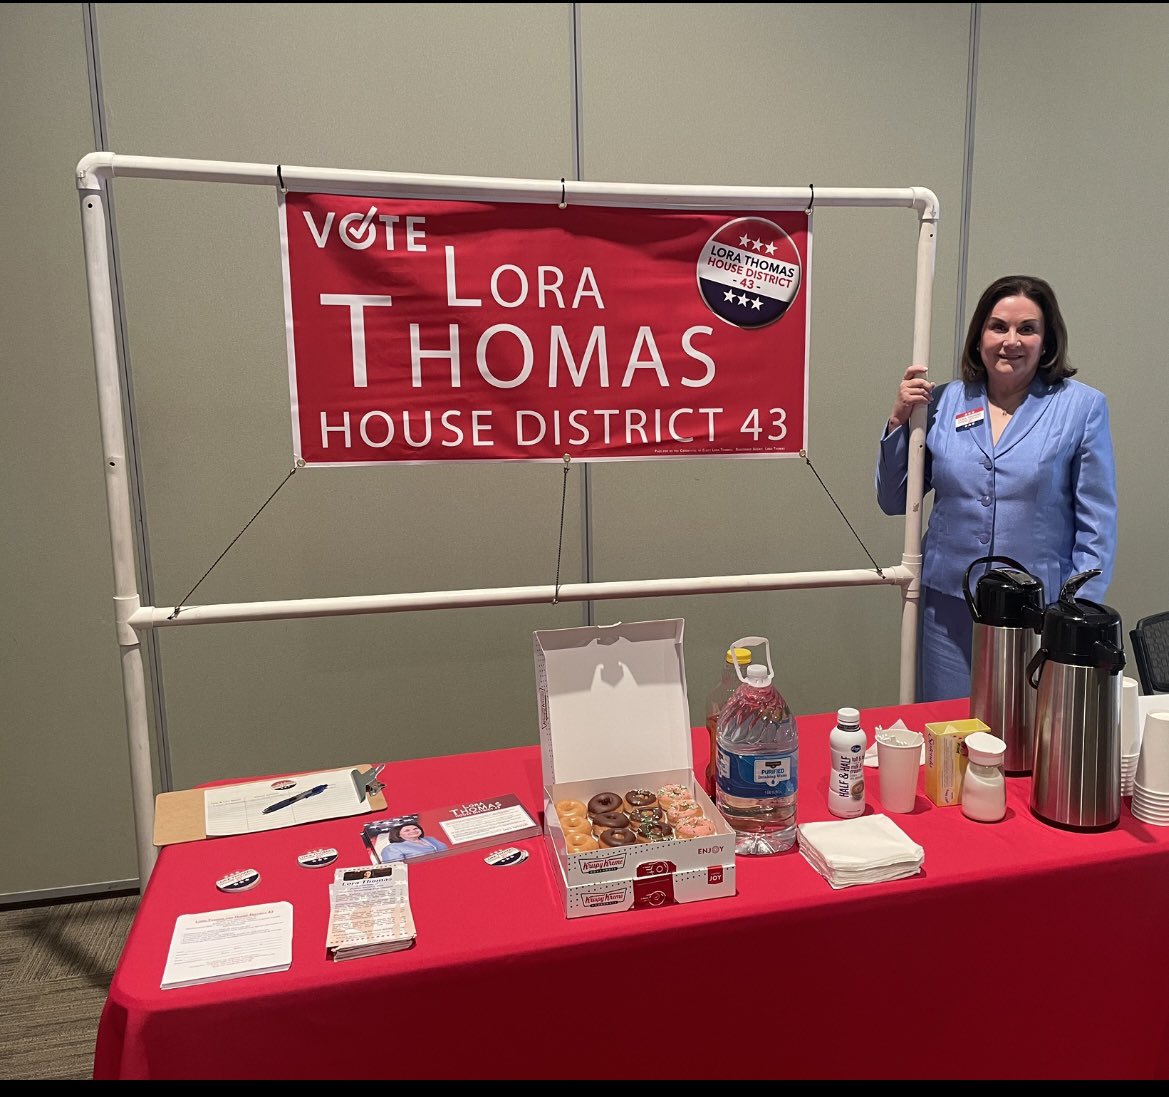 We are ready for the Candidate Meet N Greet at Southridge Rec Center for positions in Highlands Ranch. This includes HD43, HD39 and Commissioner District 3. 

Come join us - we have fresh coffee and Krispy Kreme donuts!

The road to take back HD43 starts here.  

In it to win…